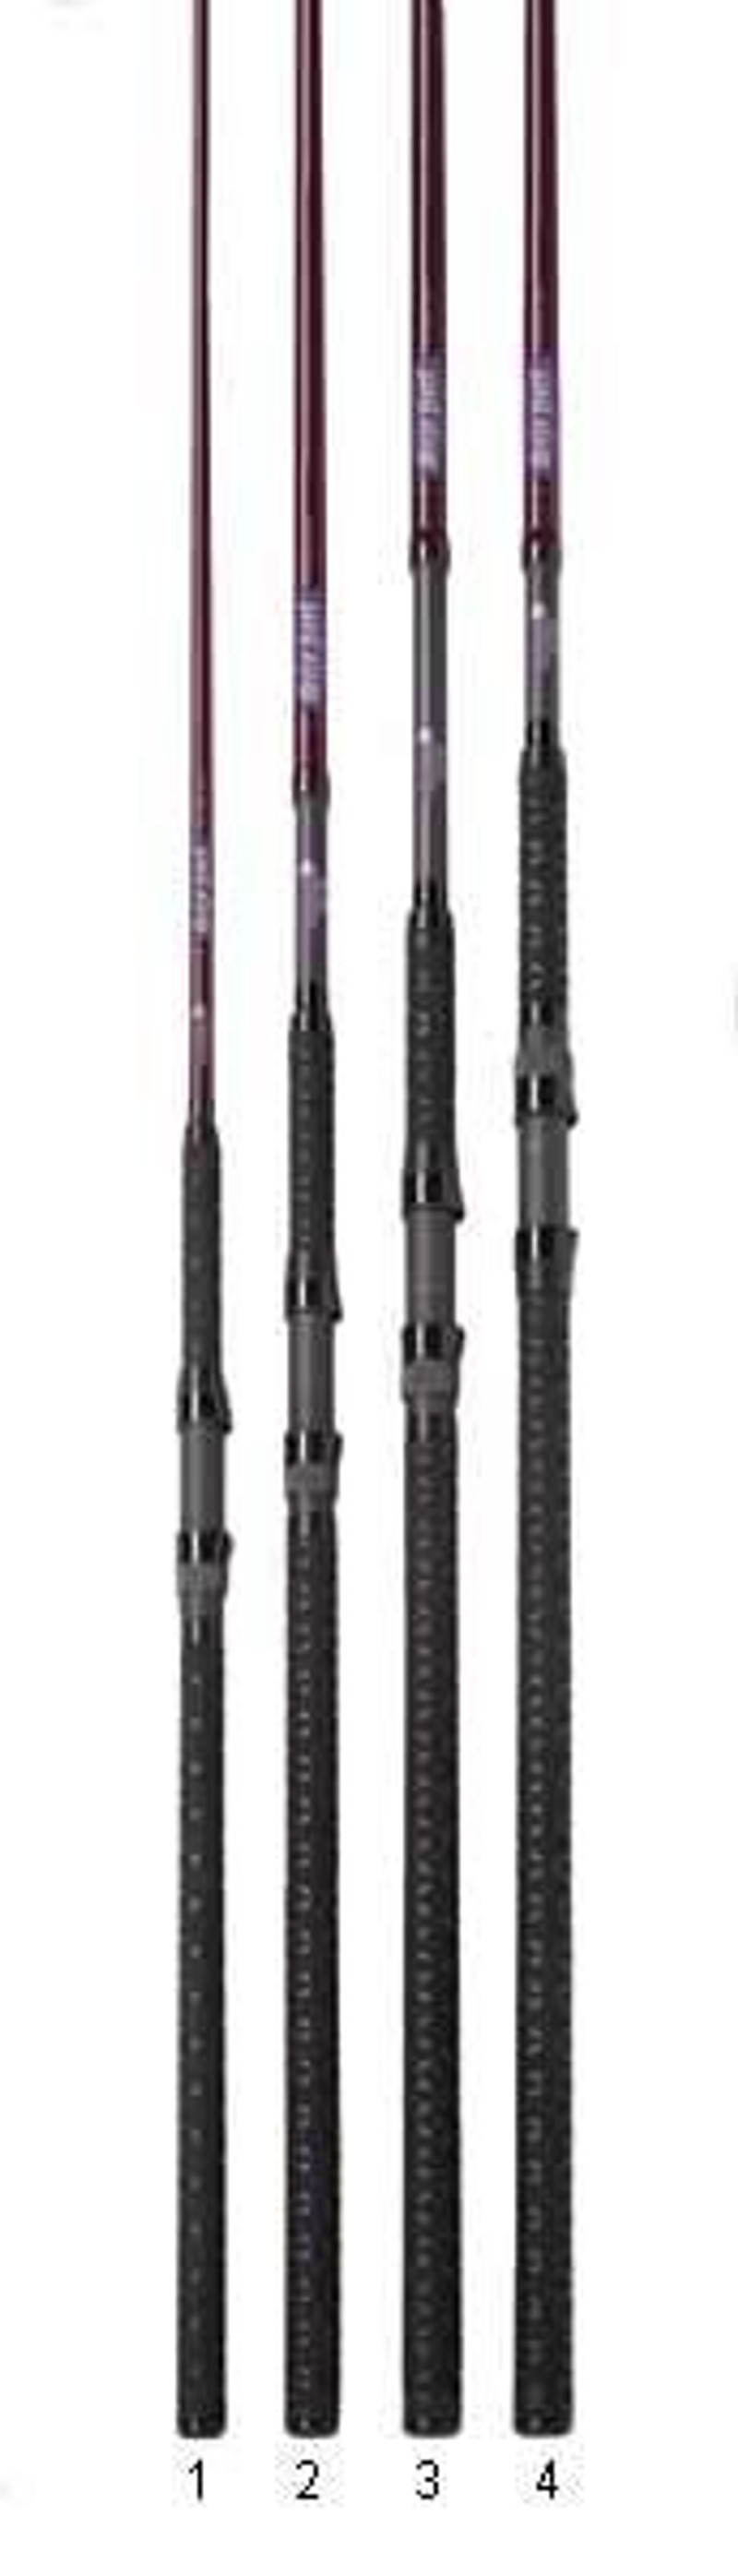 Saltwater Fishing Rod St. Croix Casting Fishing Rods & Poles for